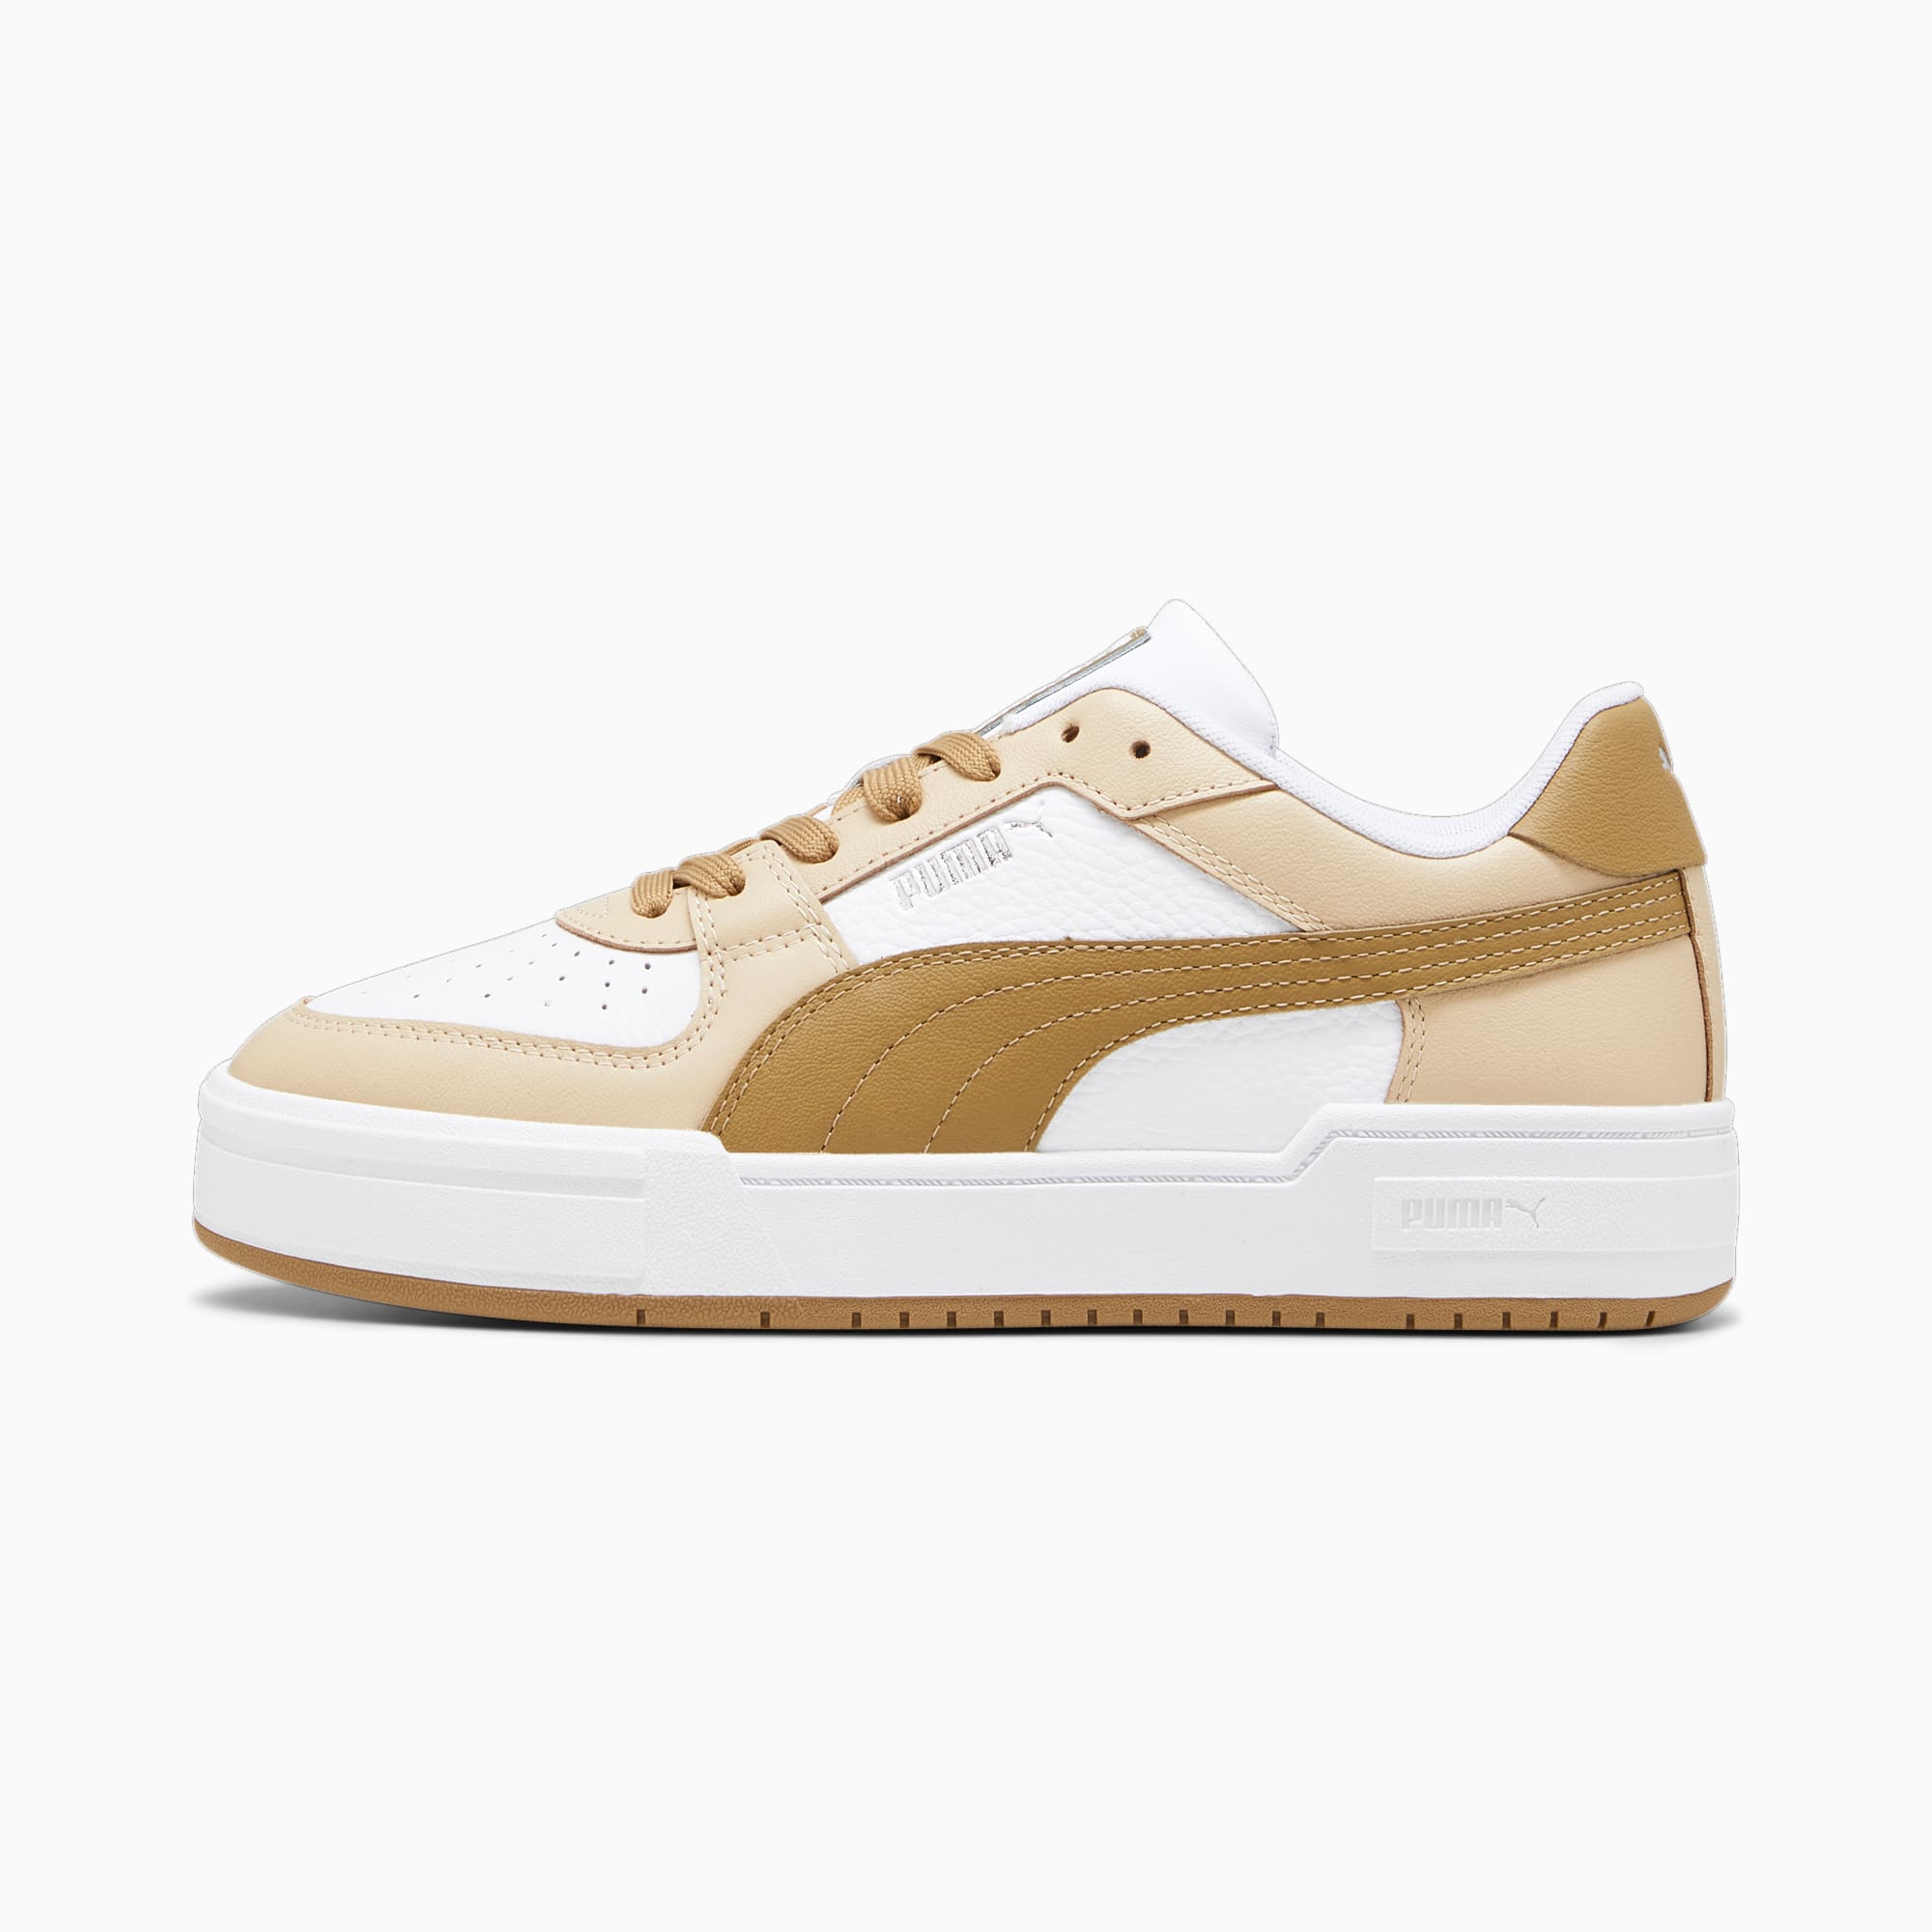 Women's PUMA Ca Pro Classic Trainers, White/Granola/Toasted, Size 44, Shoes